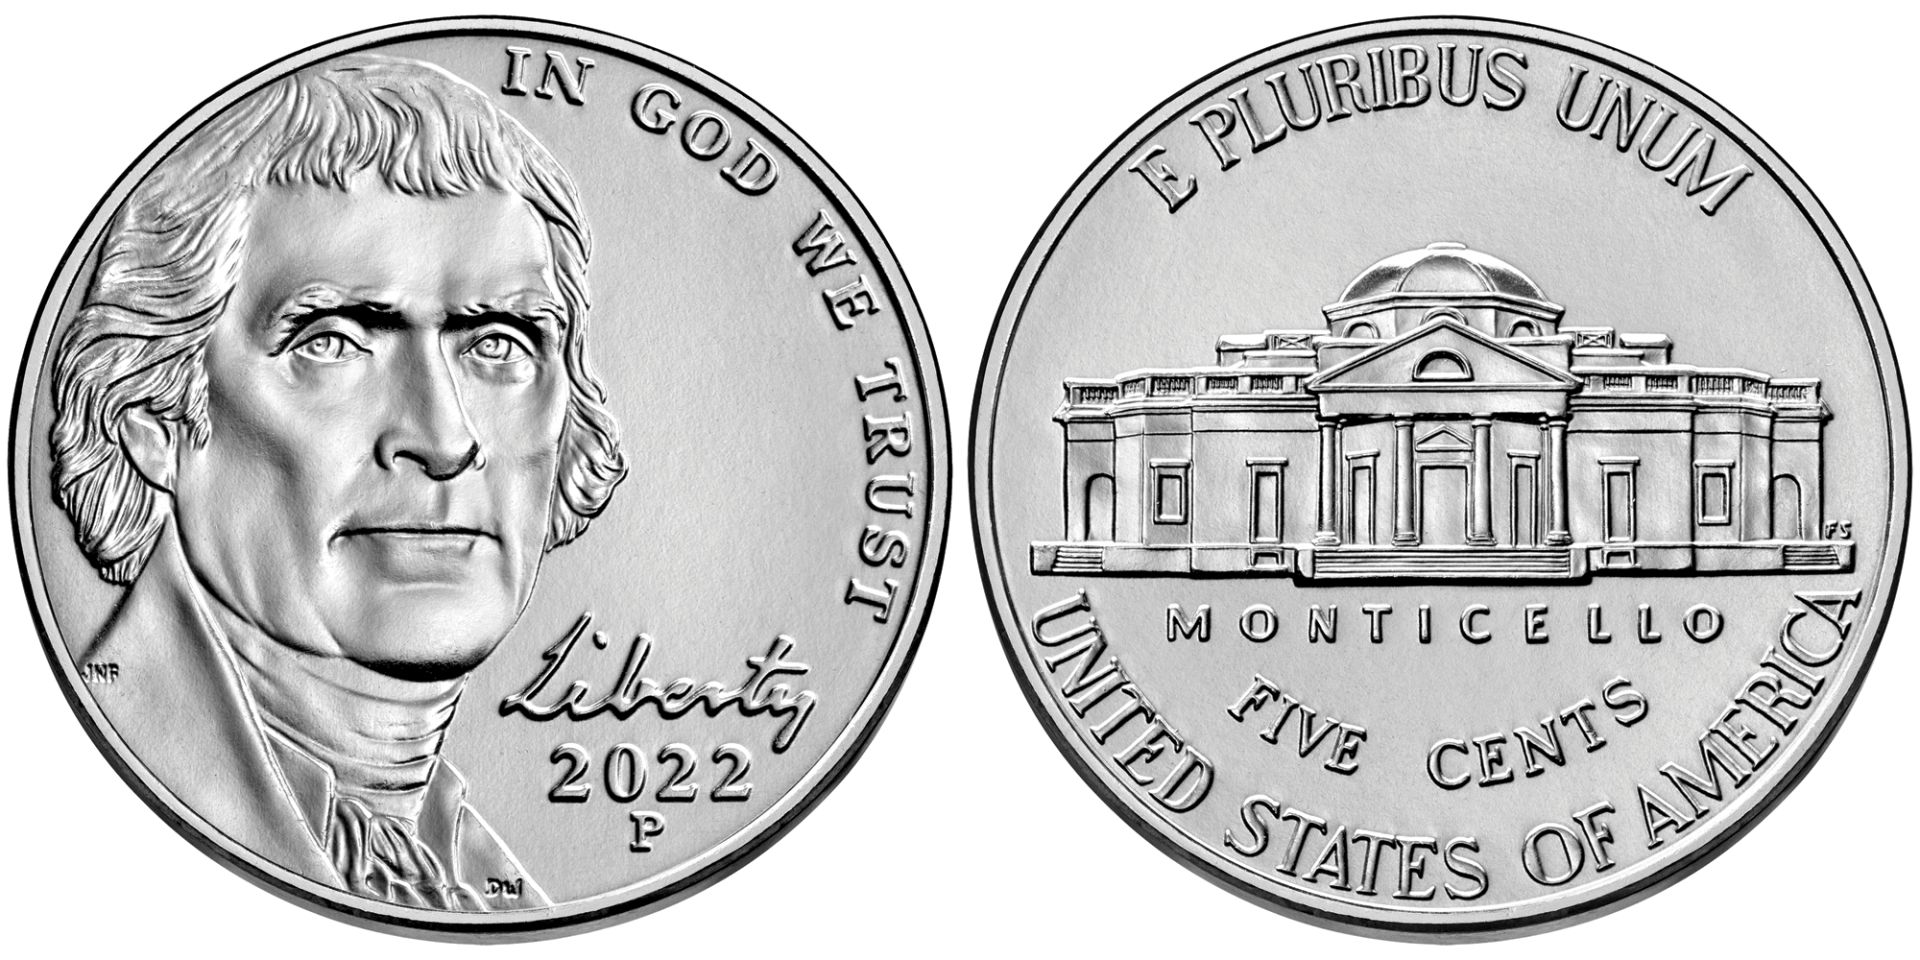 The obverse and reverse of a U.S. Nickel